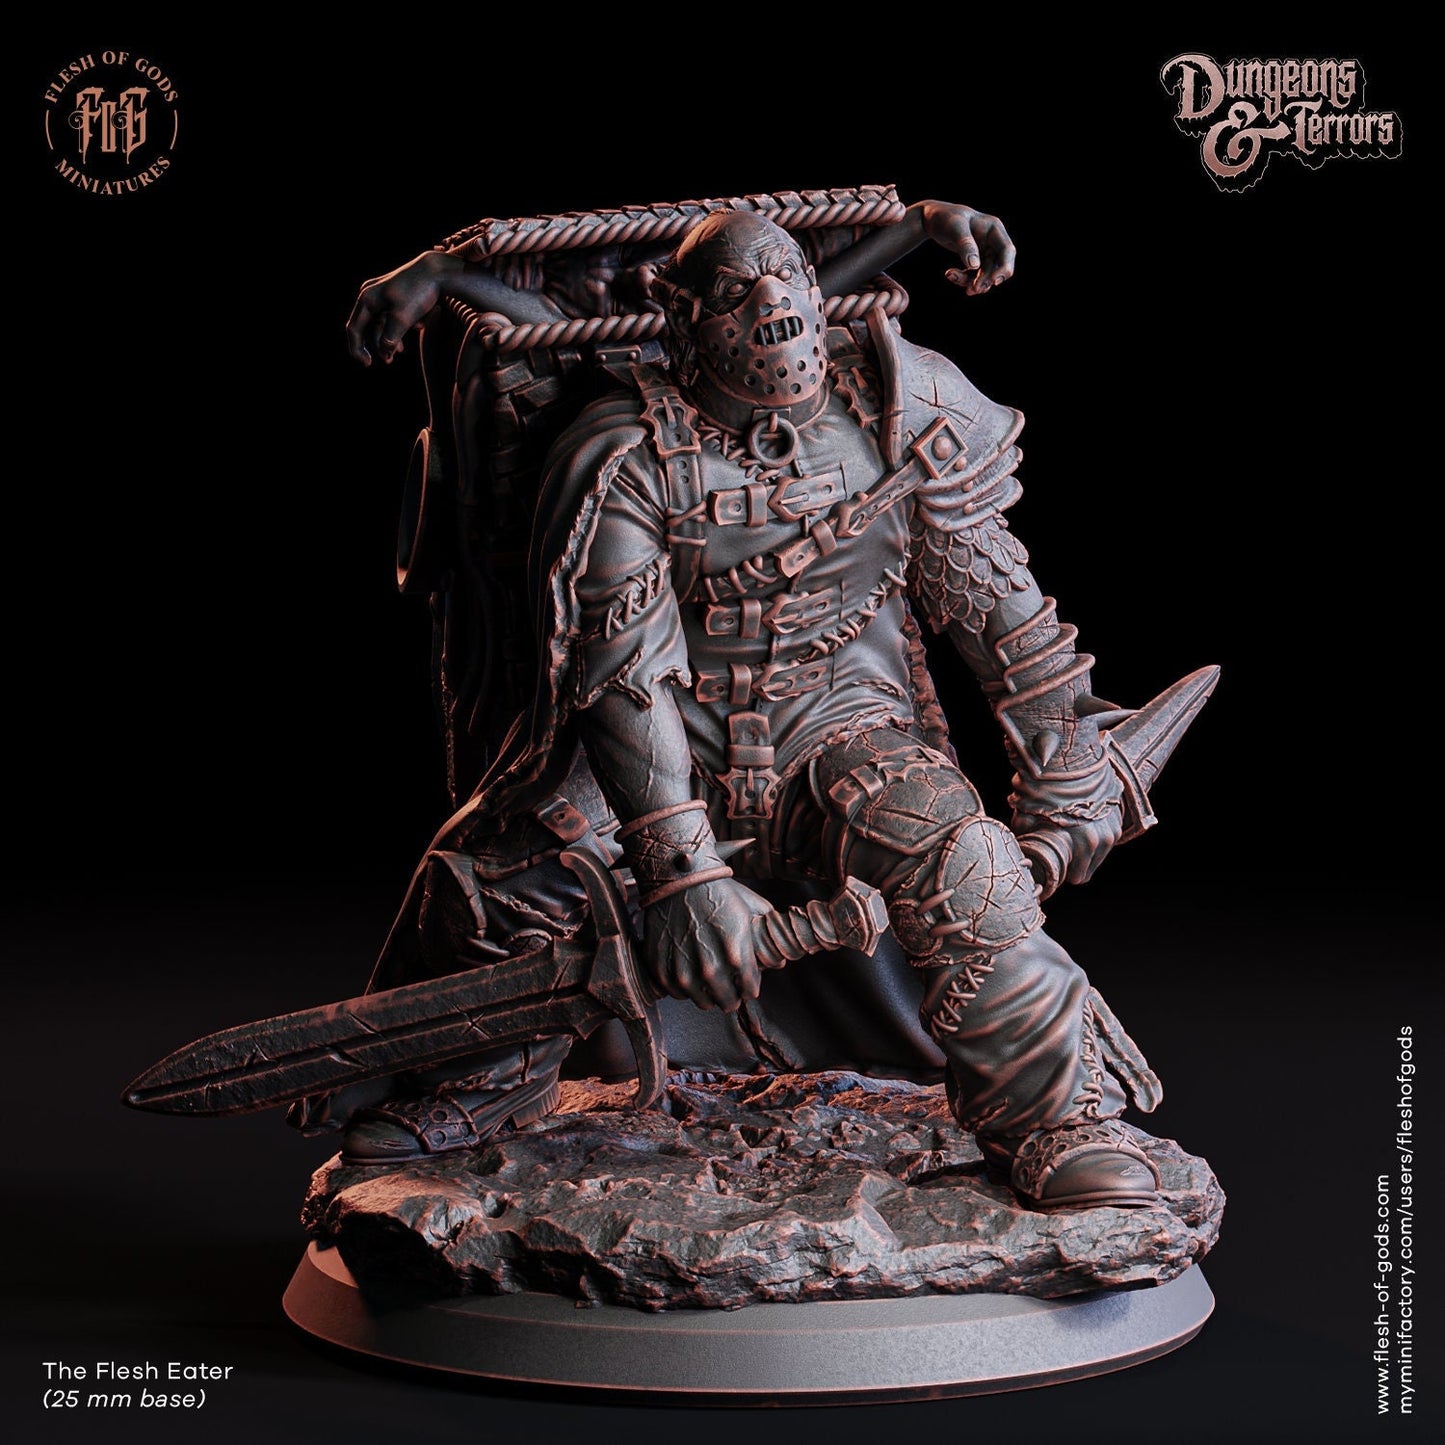 The Flesh Eater | Flesh of Gods | Enemy | 3D Printed Resin Miniature | Dungeons and Dragons | Pathfinder | Tabletop Role Playing | D&D